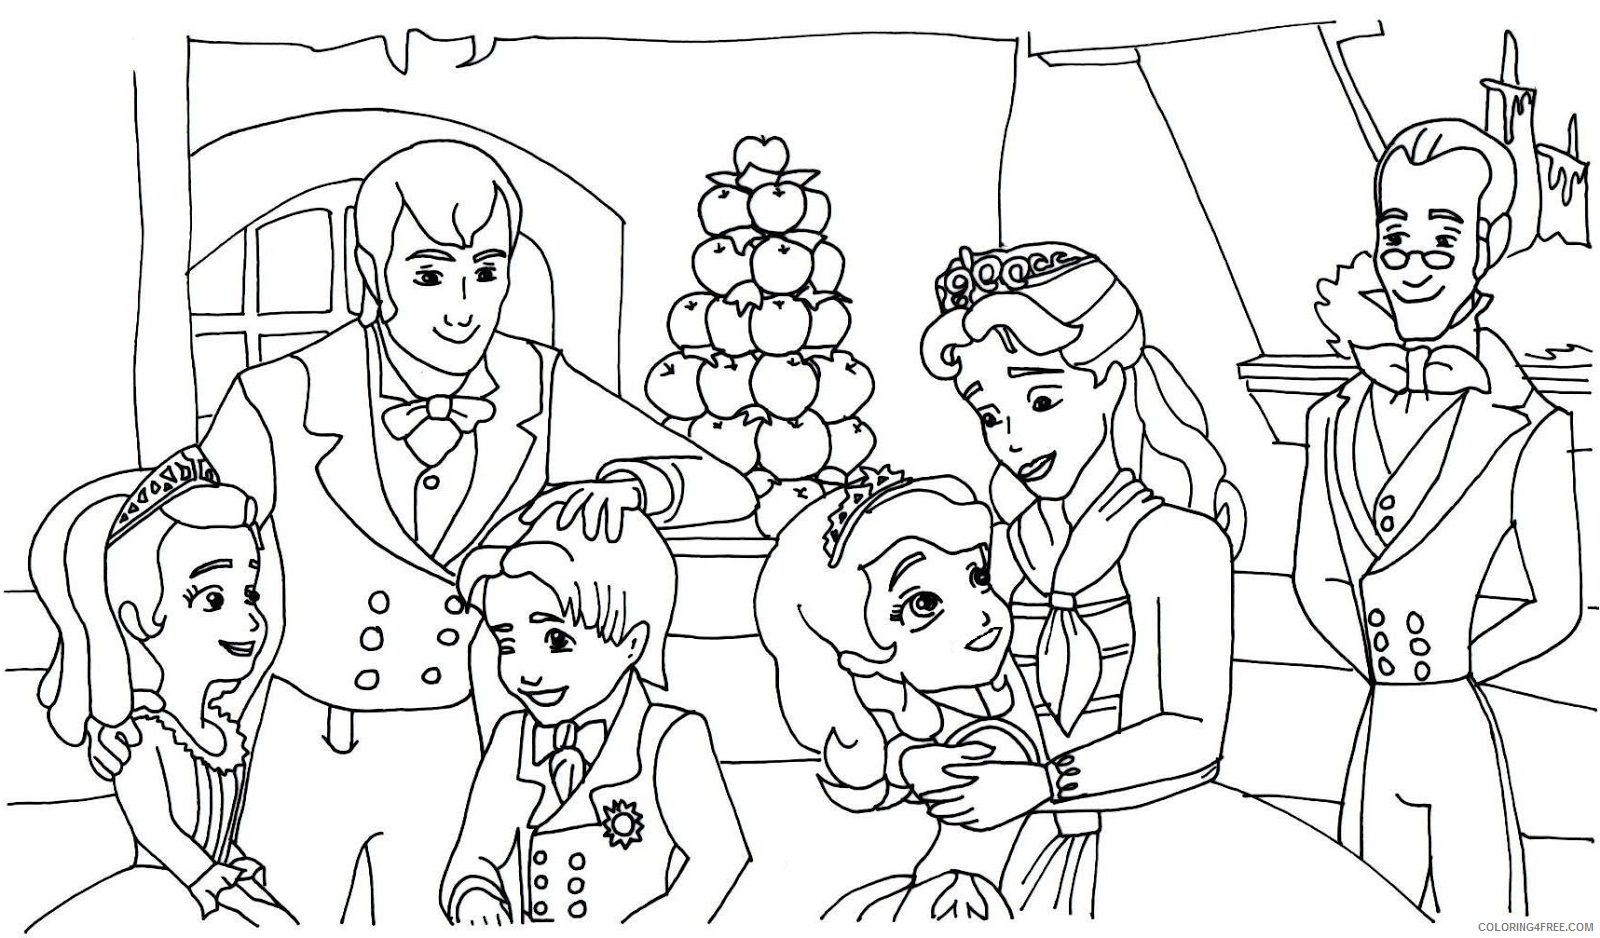 Sofia the First Coloring Pages Cartoons Sofia the First Free Printable 2020 5876 Coloring4free